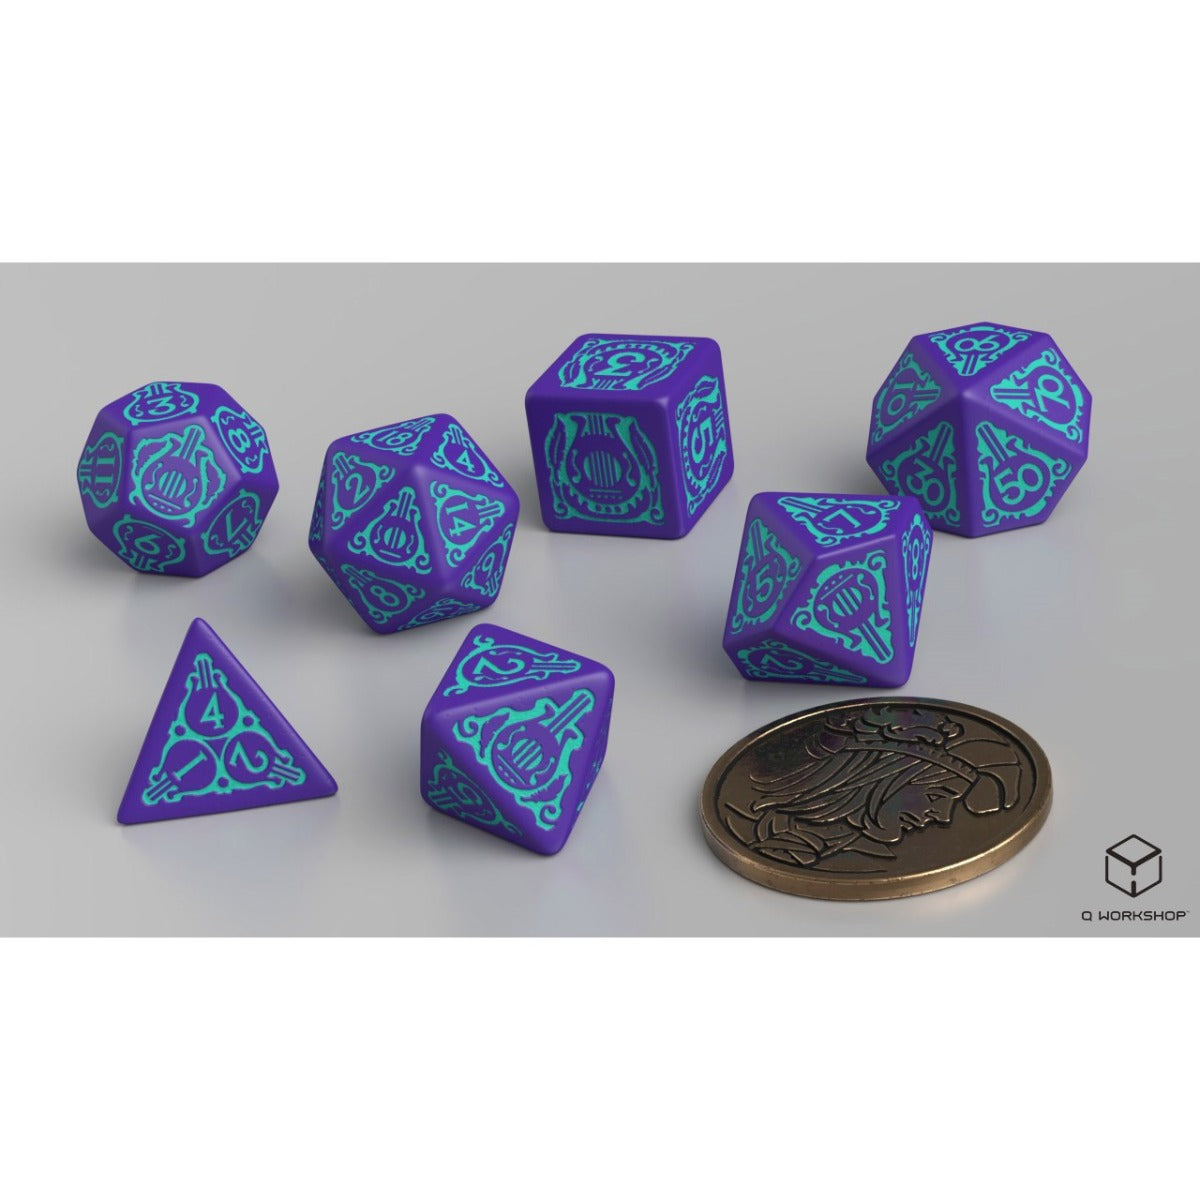 Q Workshop - The Witcher Dice Set Dandelion - Half A Century Of Poetry Dice Set 7 With Coin